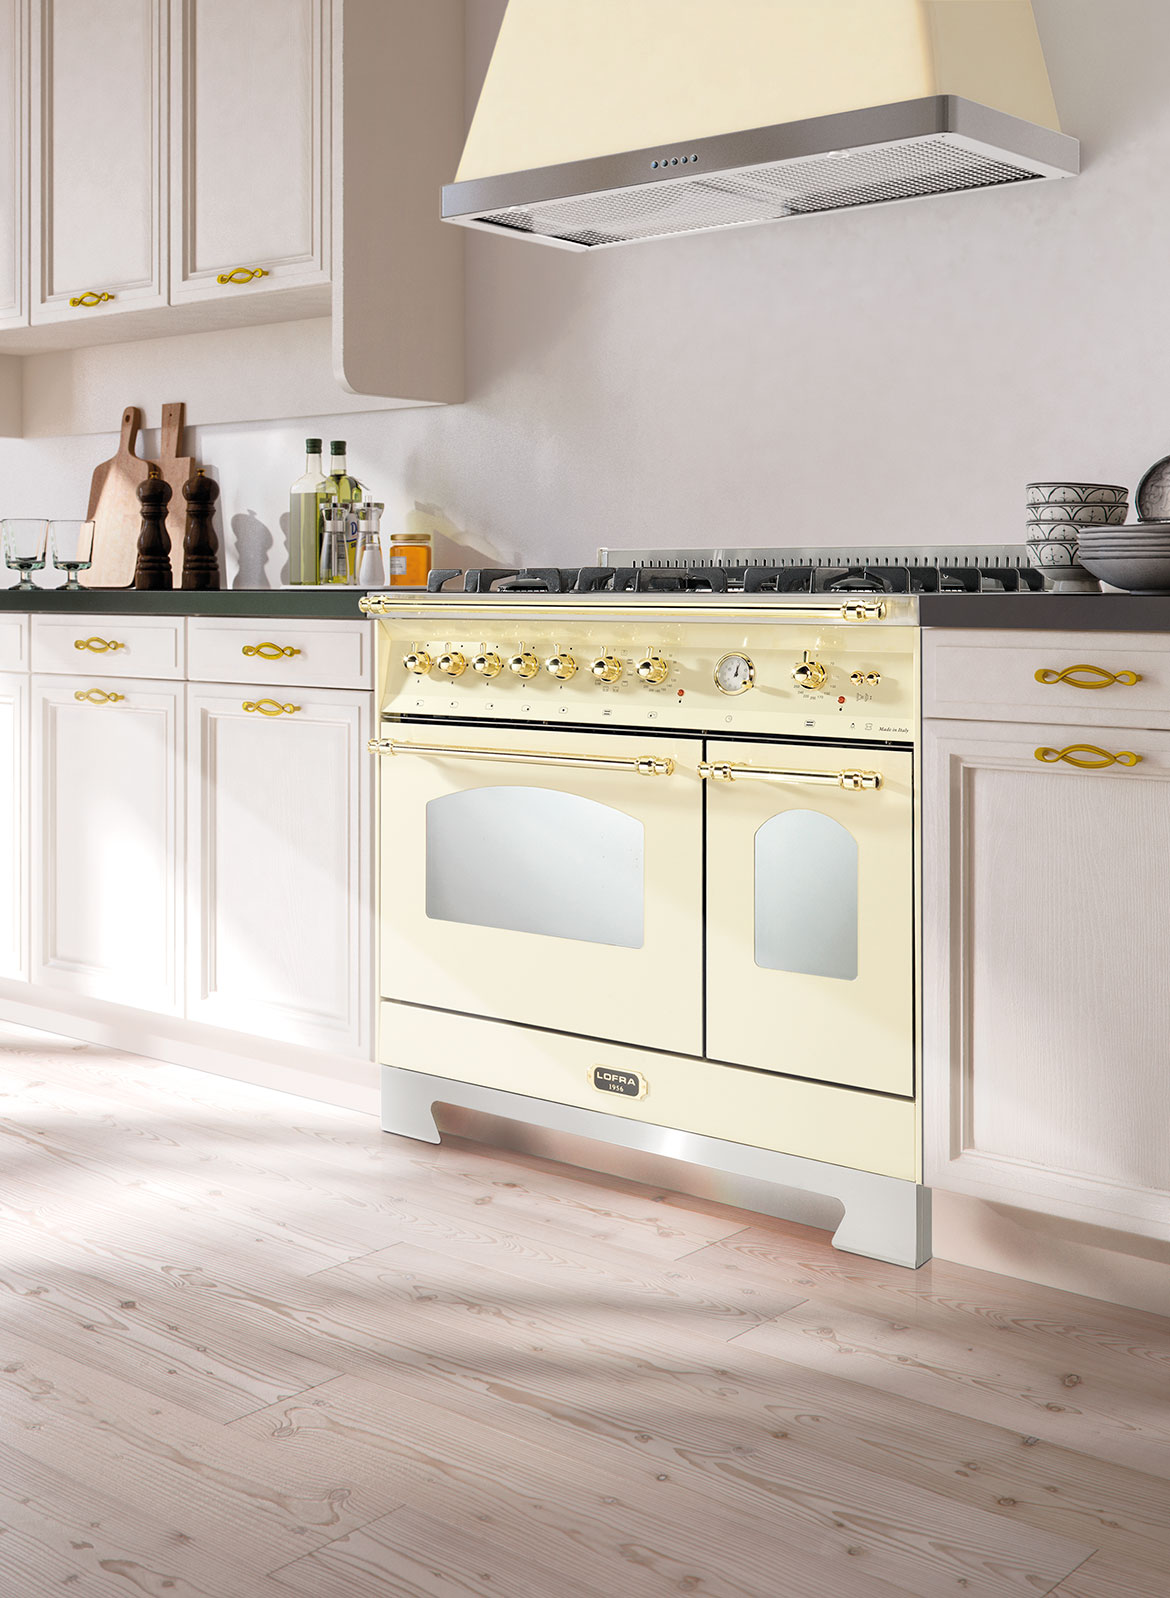 Heavy Duty Stove - 4 Burners - Double Unit - 70cm Deep - with Oven -  Electric - Maxima